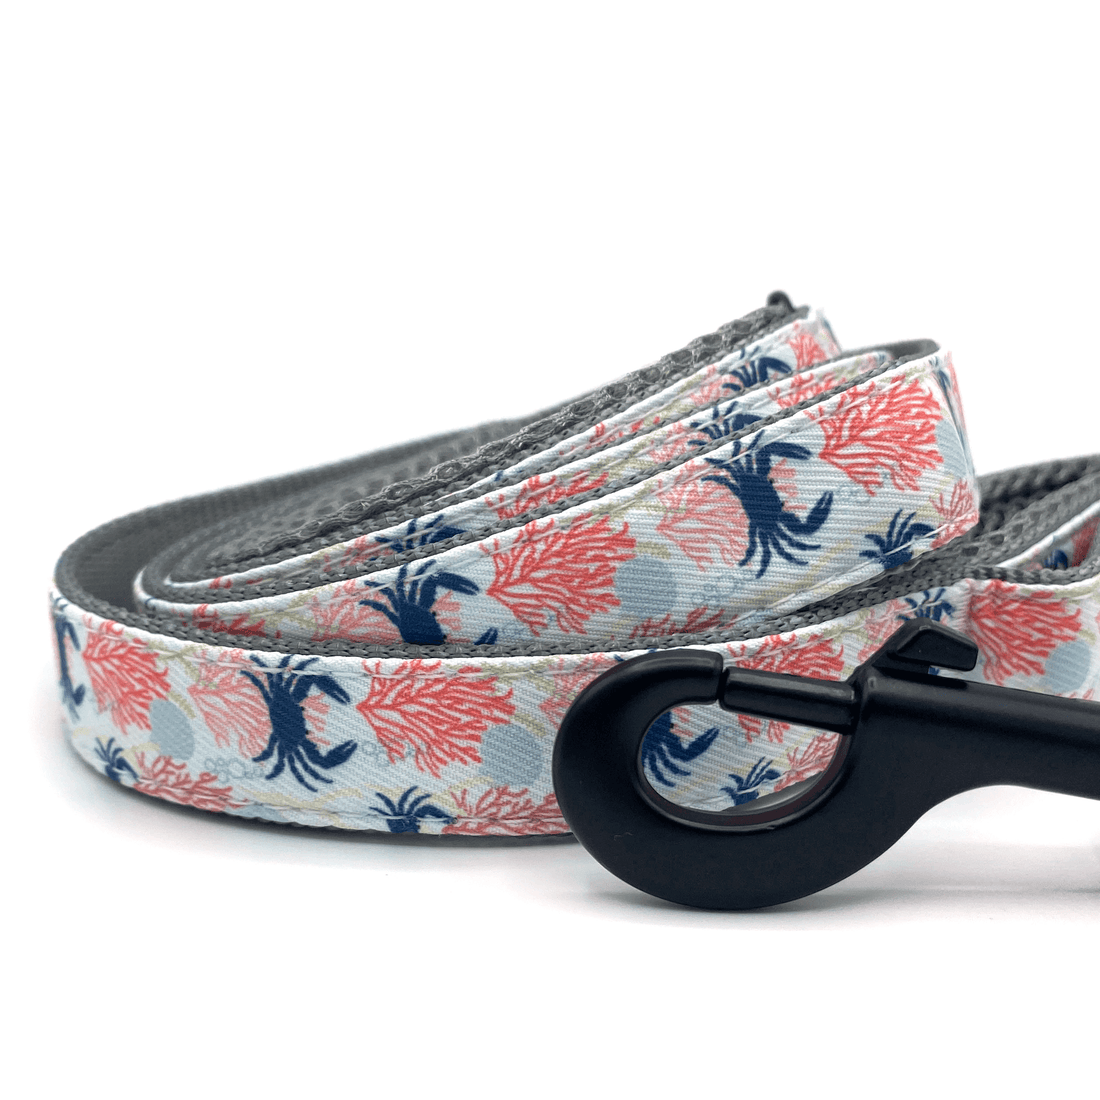 a dog leash with blue crabs, seashells, and pink corals with black hardware and light grey padded handles